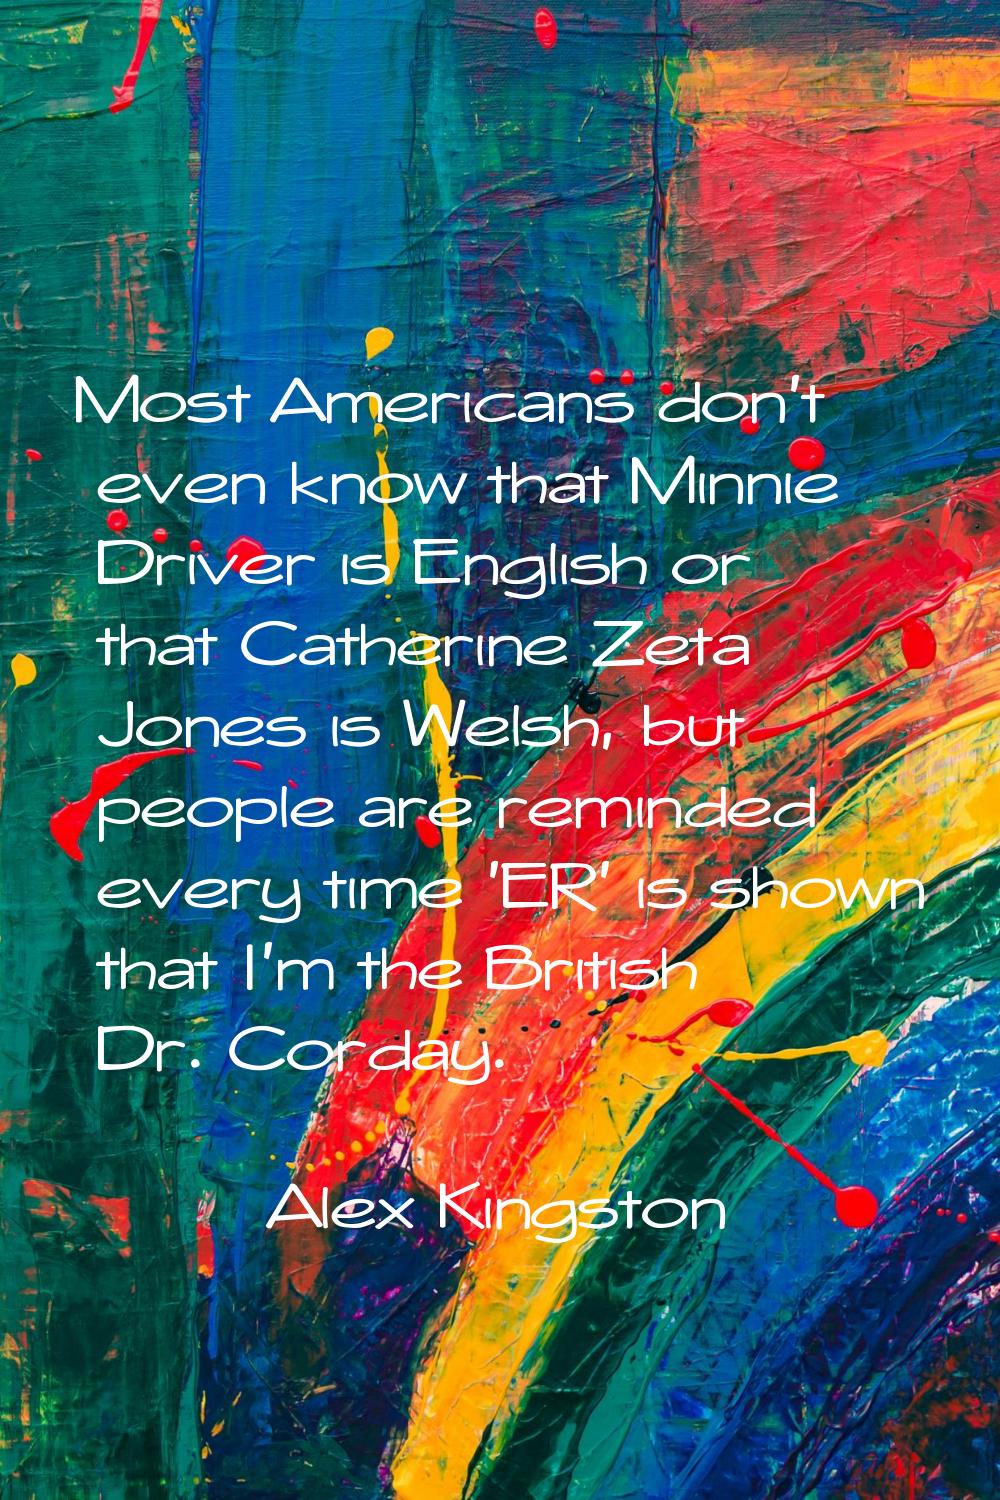 Most Americans don't even know that Minnie Driver is English or that Catherine Zeta Jones is Welsh,